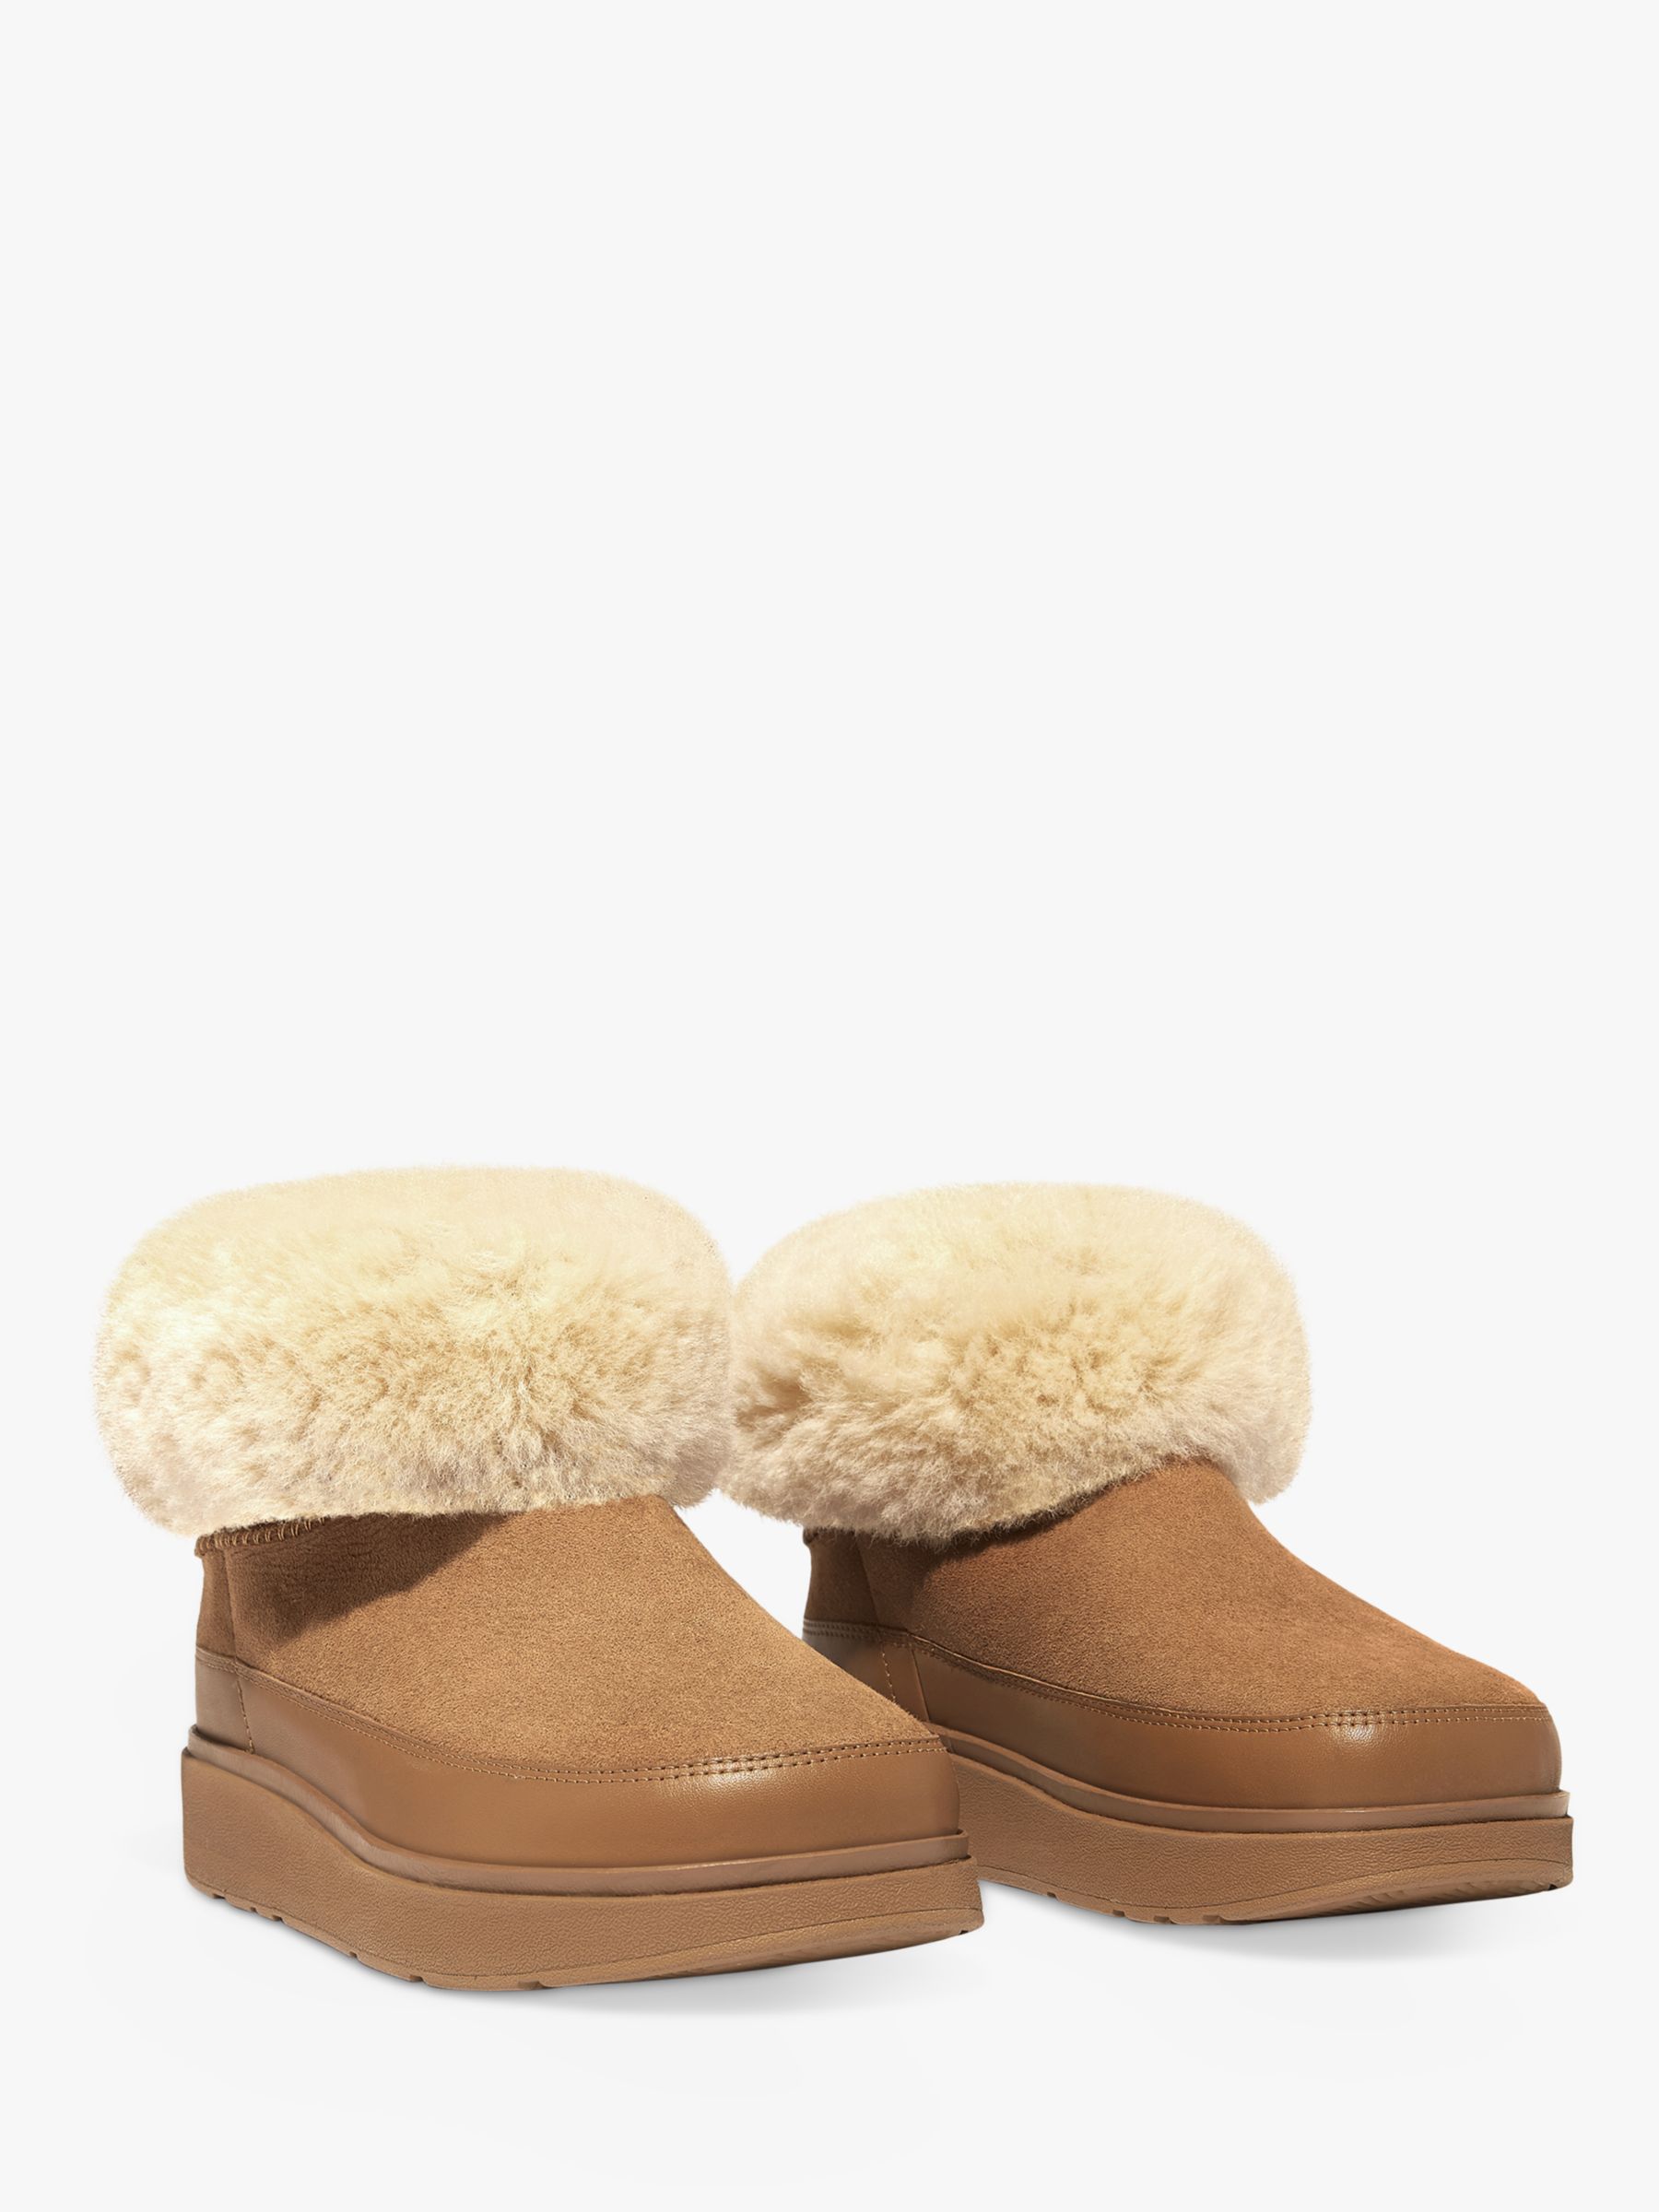 Buy FitFlop Sheepskin Ankle Boots Online at johnlewis.com